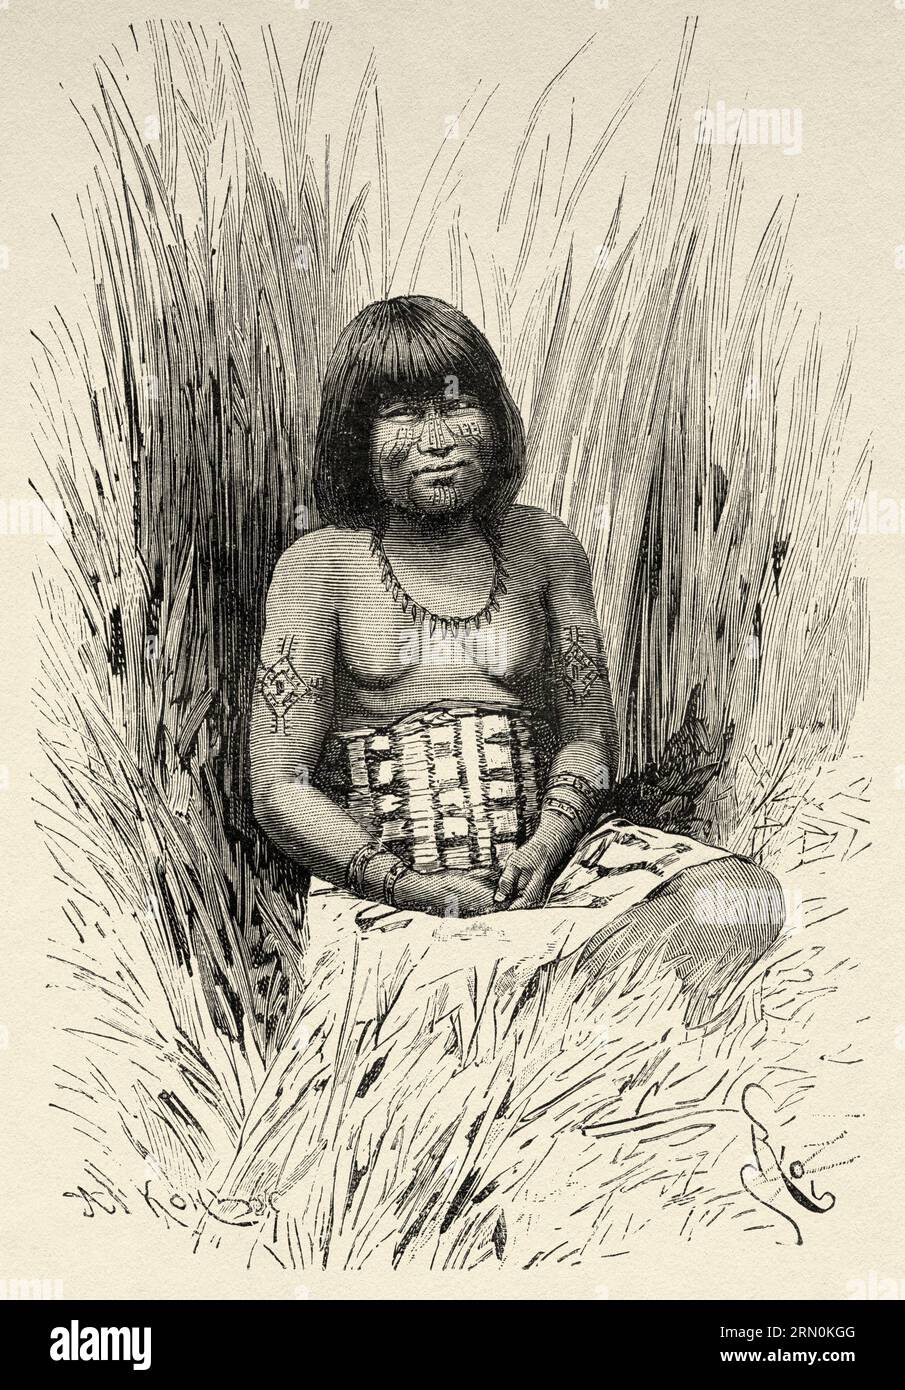 Young indigenous Toba Indian girl, Bolivia, South America. Journey in search of the remains of the Crevaux mission by Émile-Arthur Thouar 1884. Old 19th century engraving from Le Tour du Monde 1906 Stock Photo